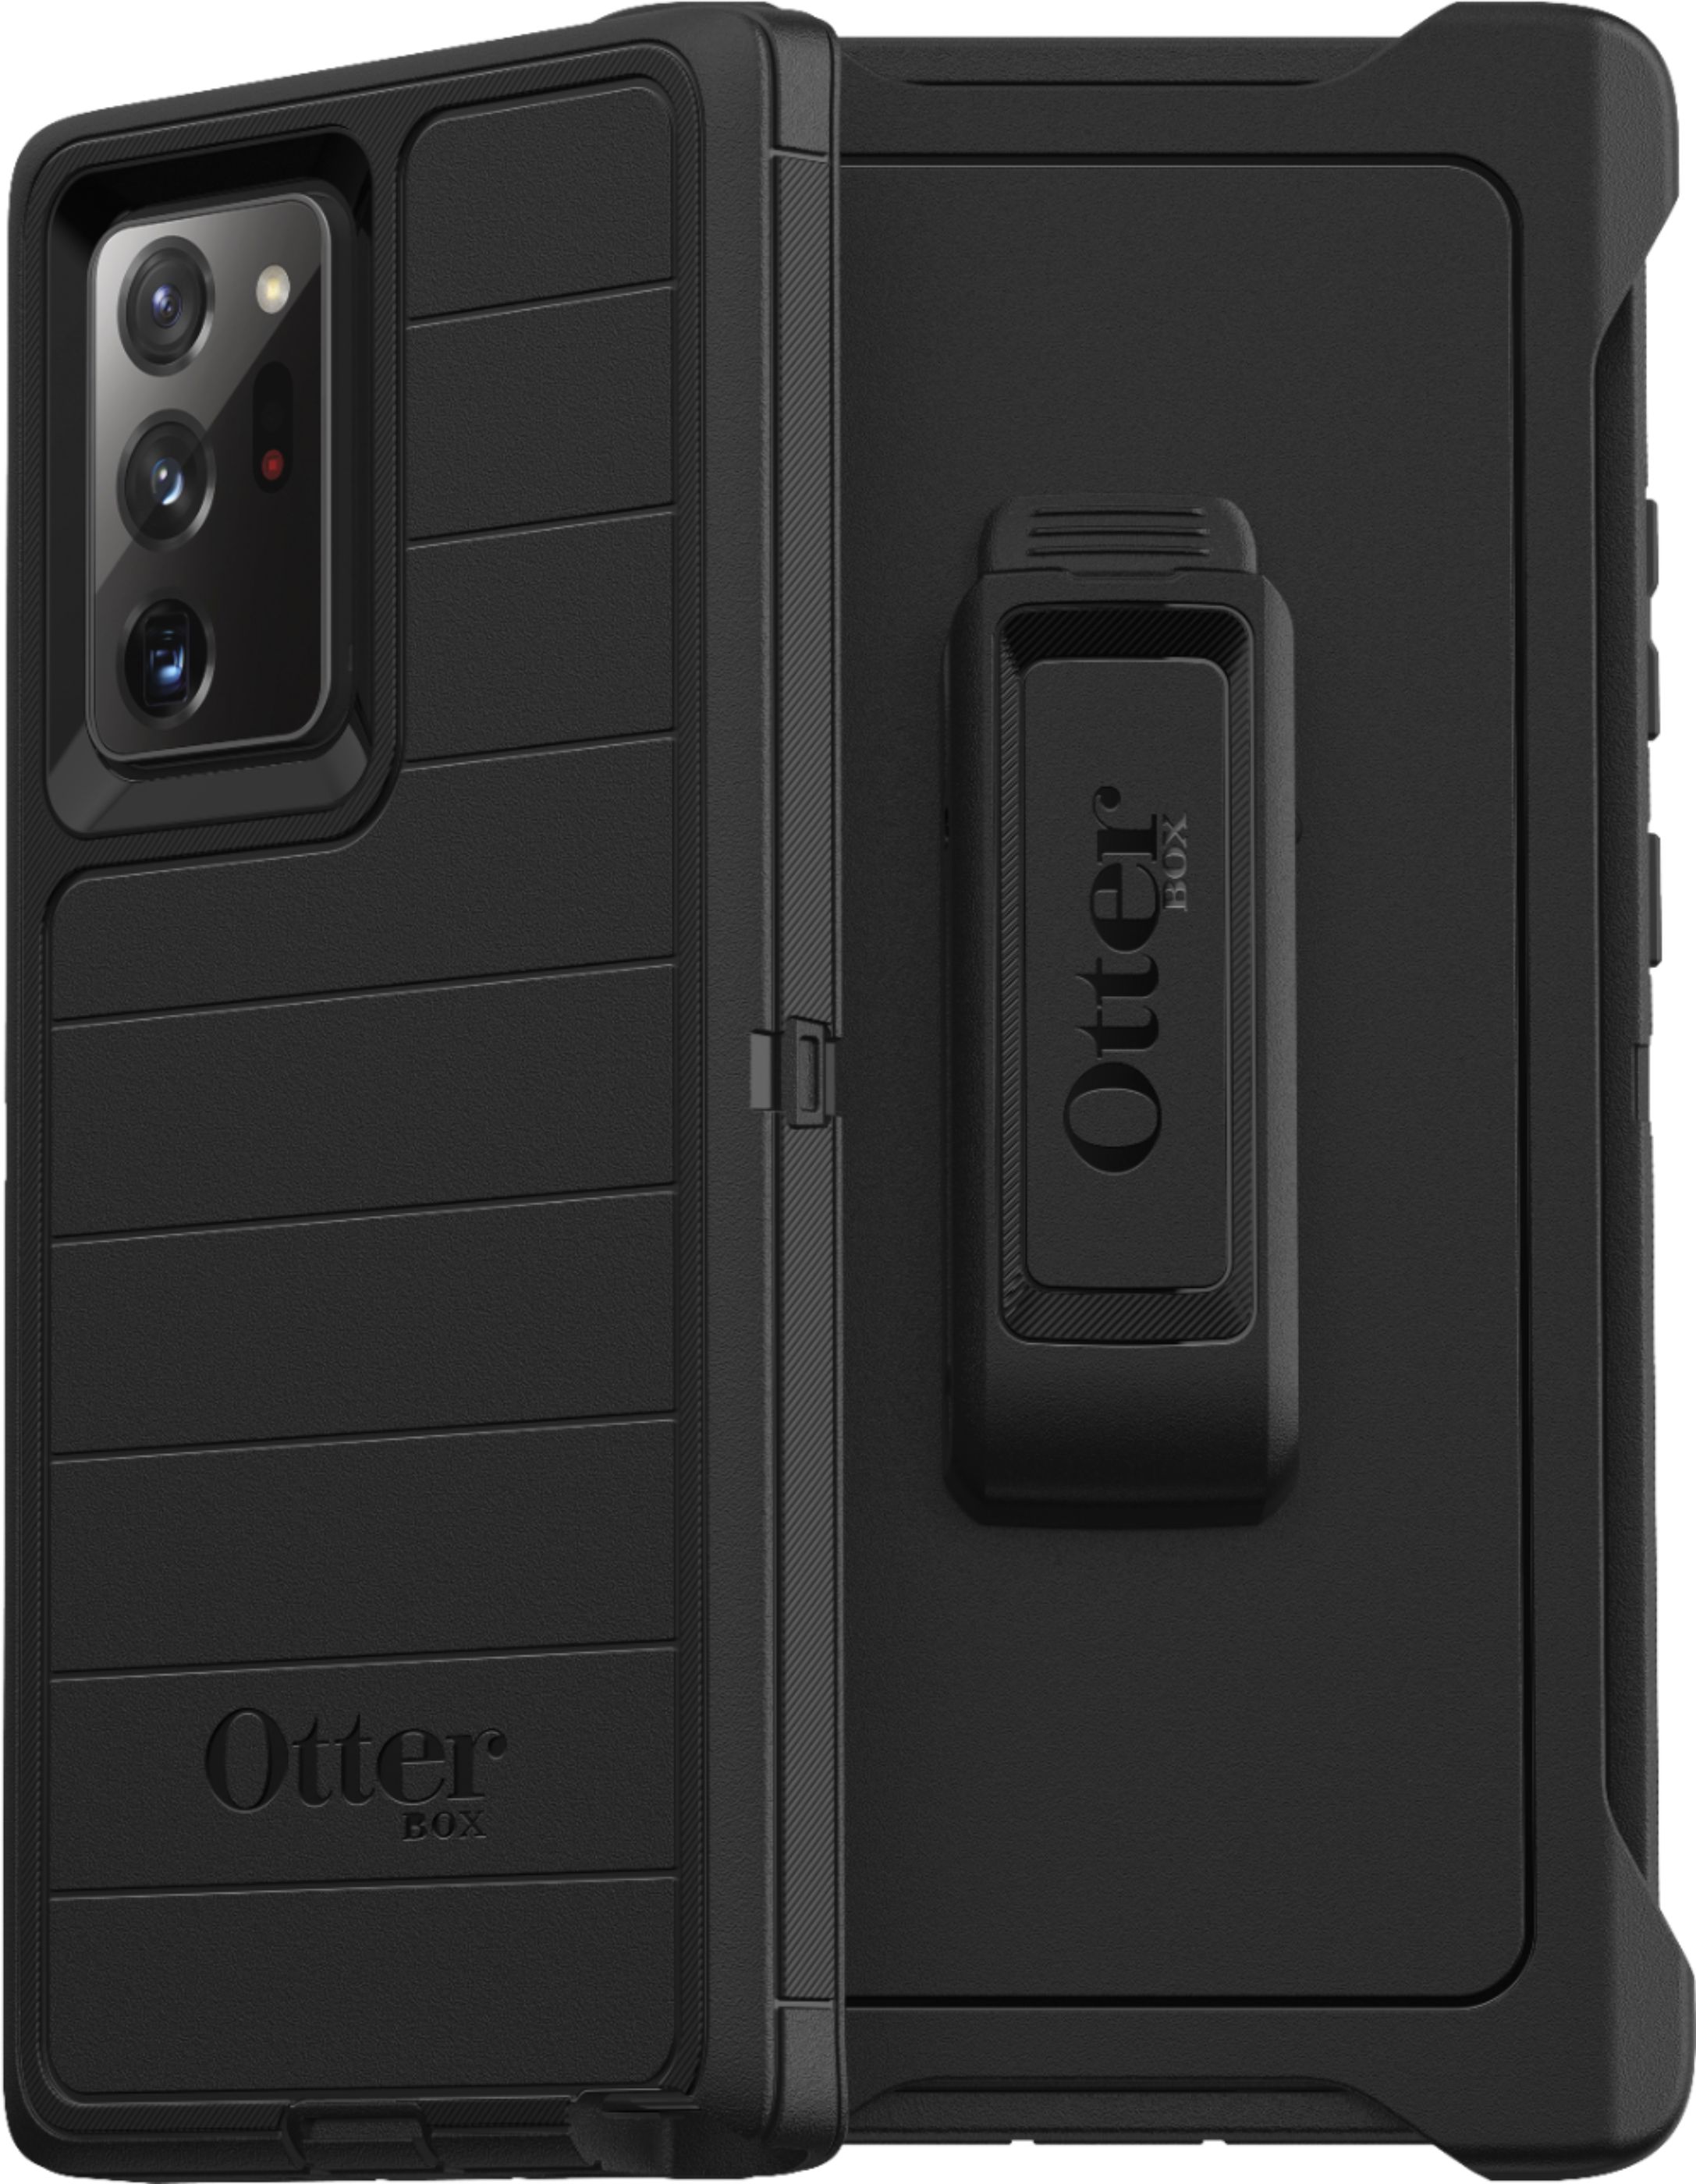 Angle View: OtterBox - Defender Pro Series for Galaxy Note20 Ultra 5G - Black